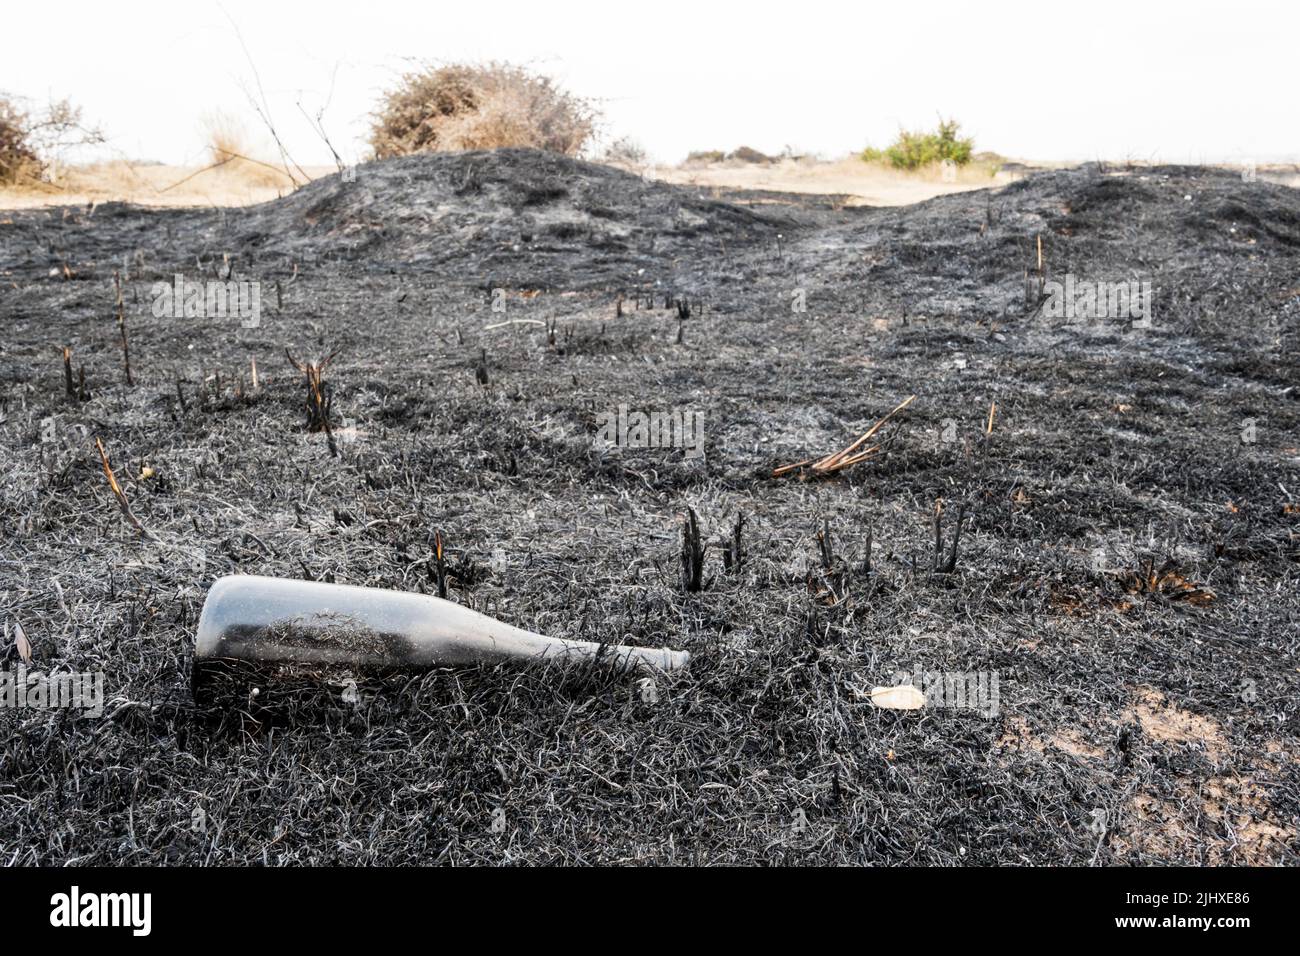 An old glass bottle left exposed after a grass fire on an area of heathland. Stock Photo